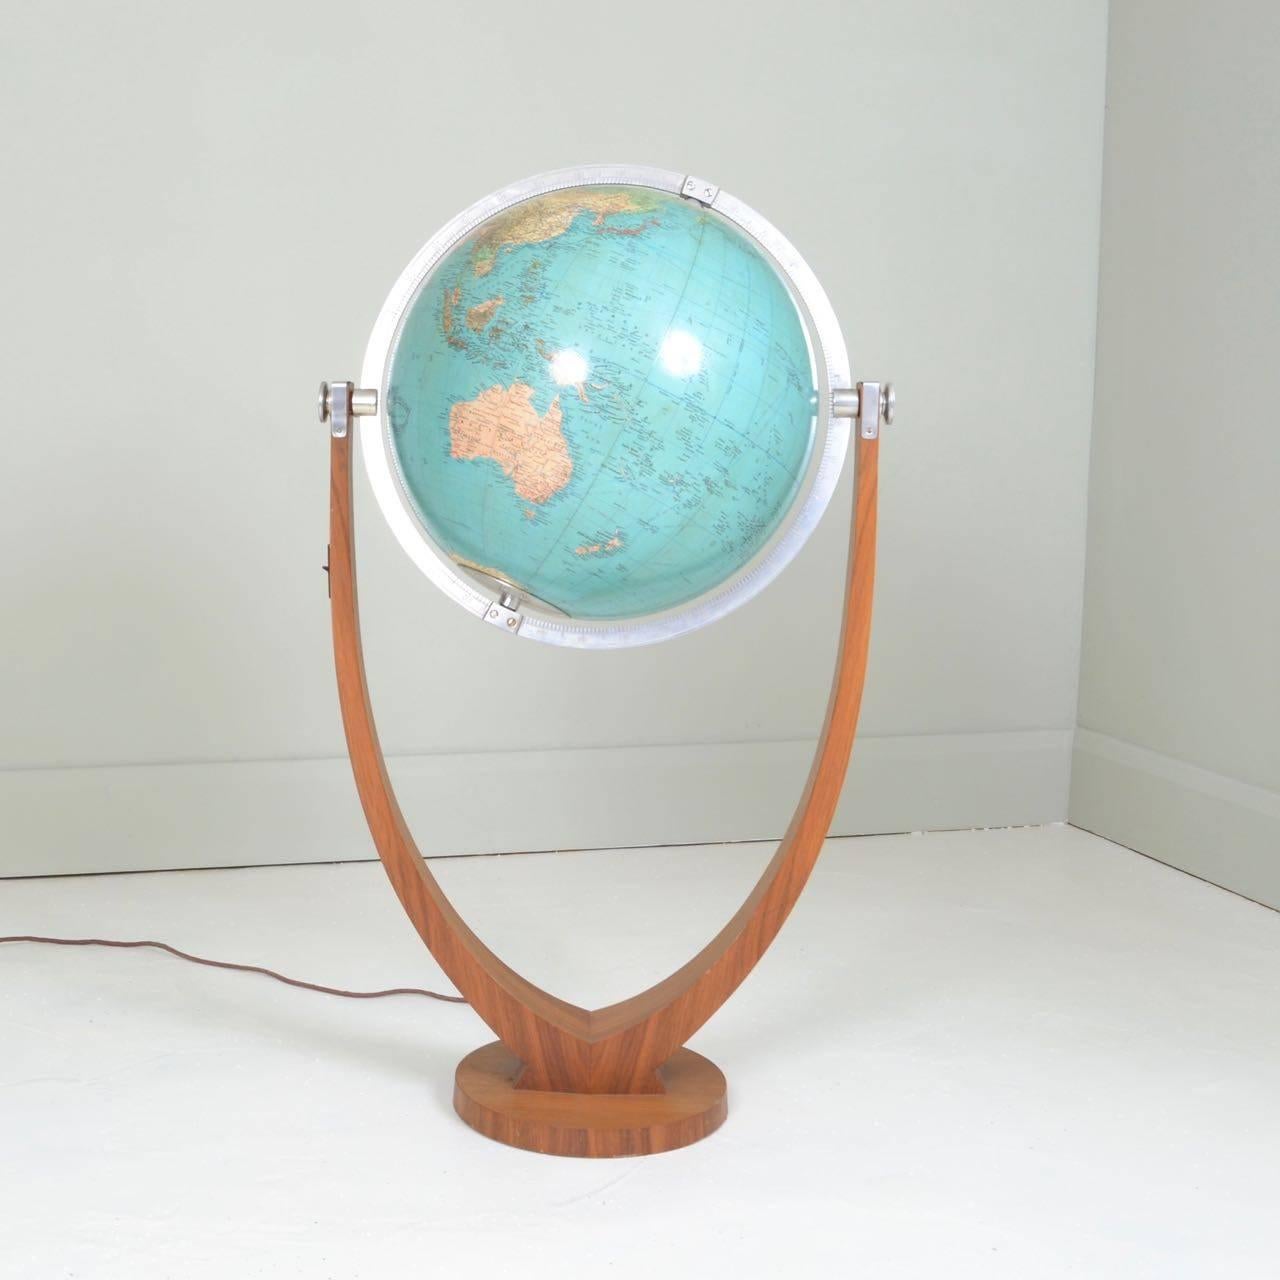 The Duo Globe designed by Paul Oestergaard.
Teak stand , engraved steel fittings, handblown 54cm illuminating 
globe and hand papered cartography.
Manufactured by Columbus Germany, circa 1950.